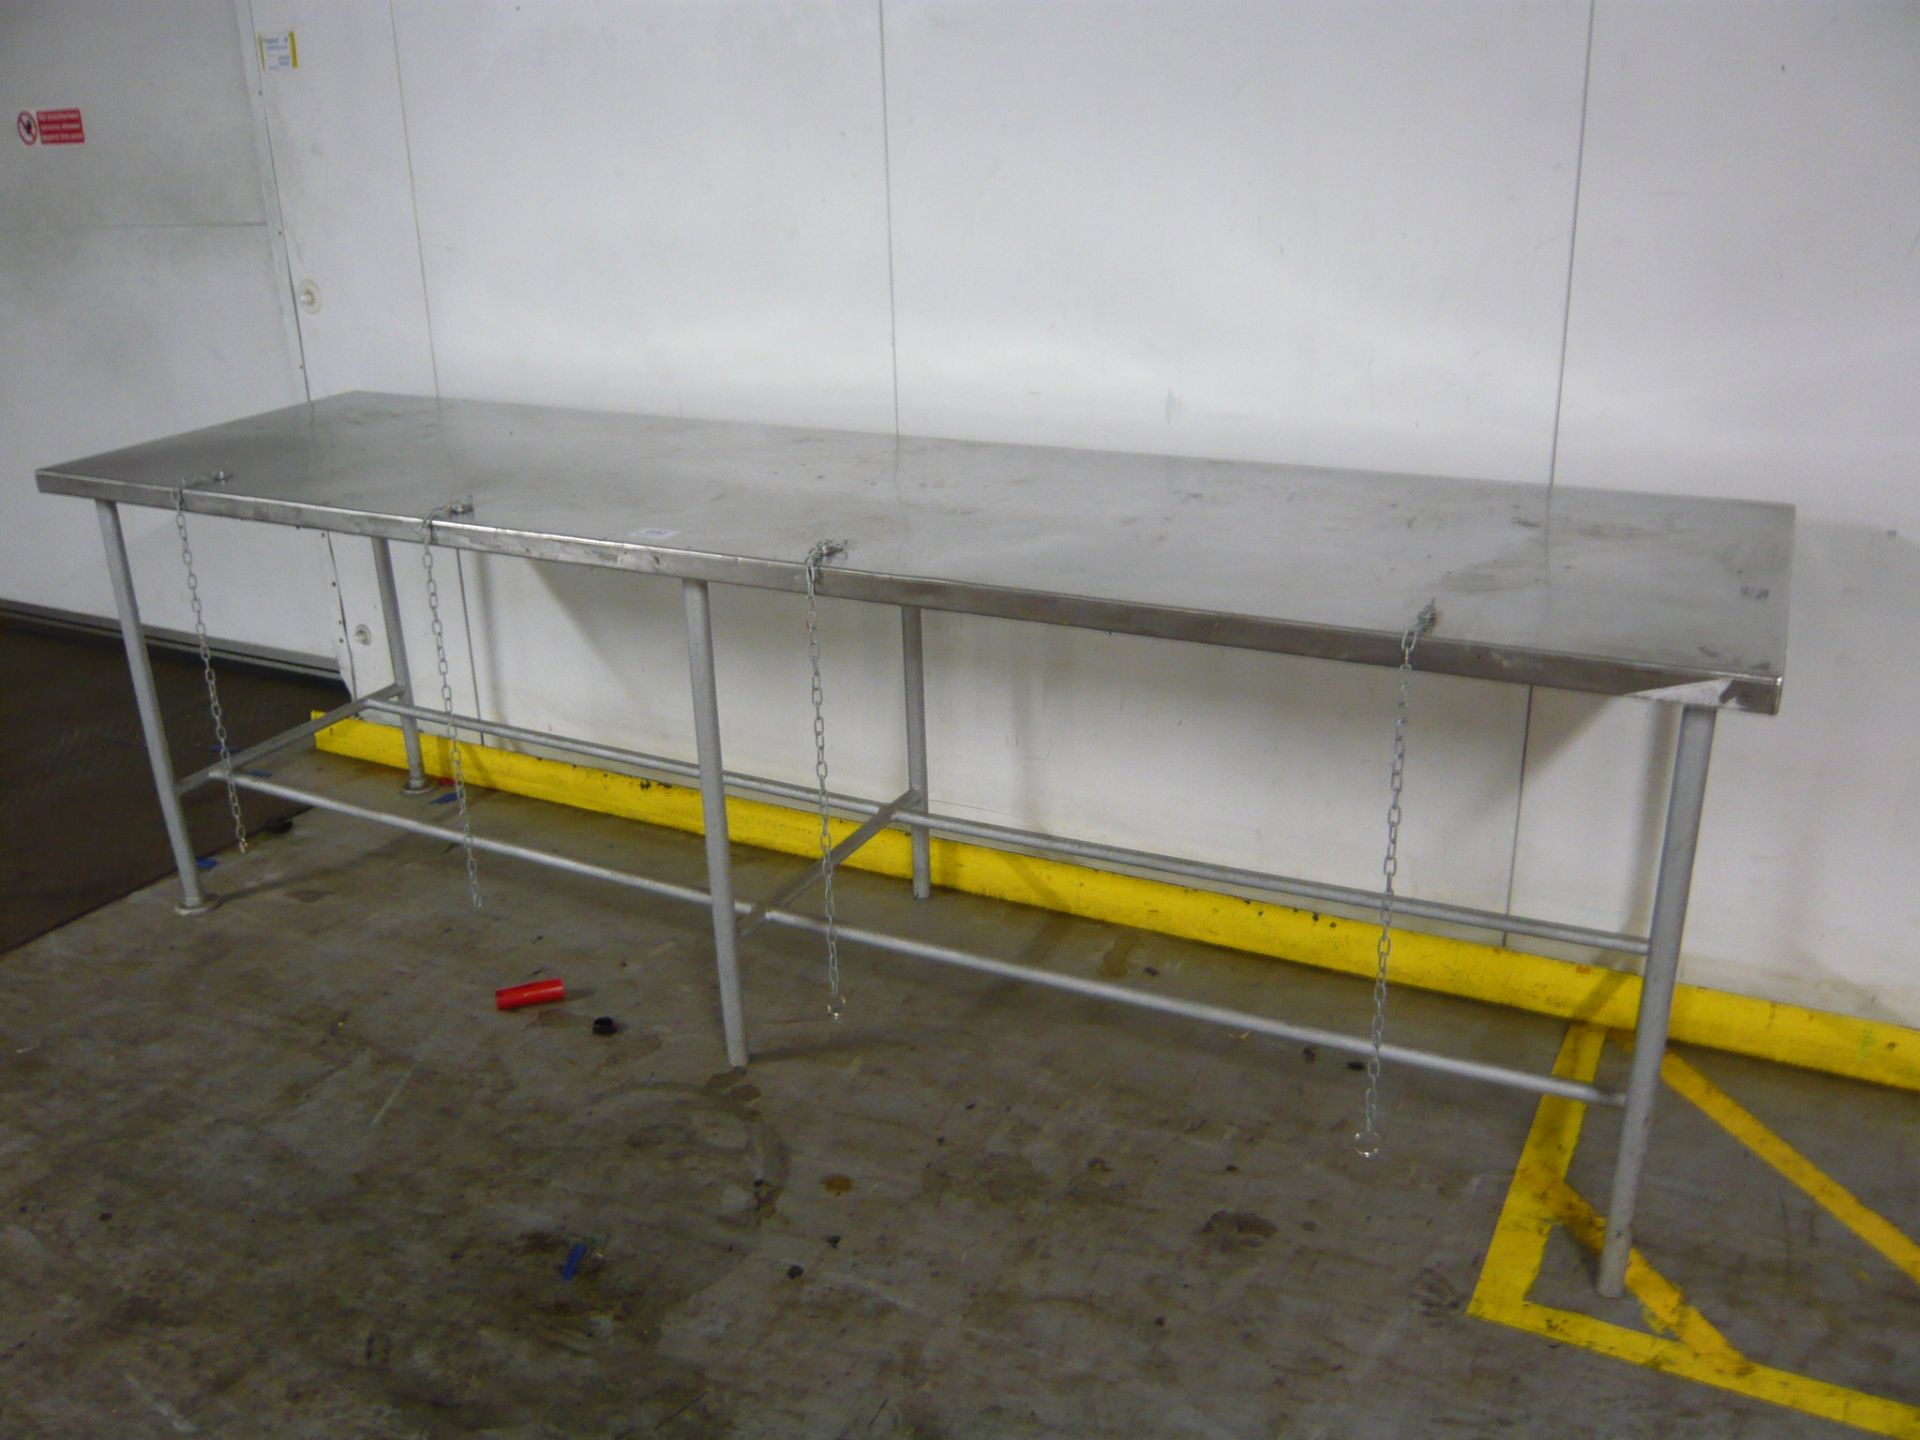 Stainless steel topped preparation table